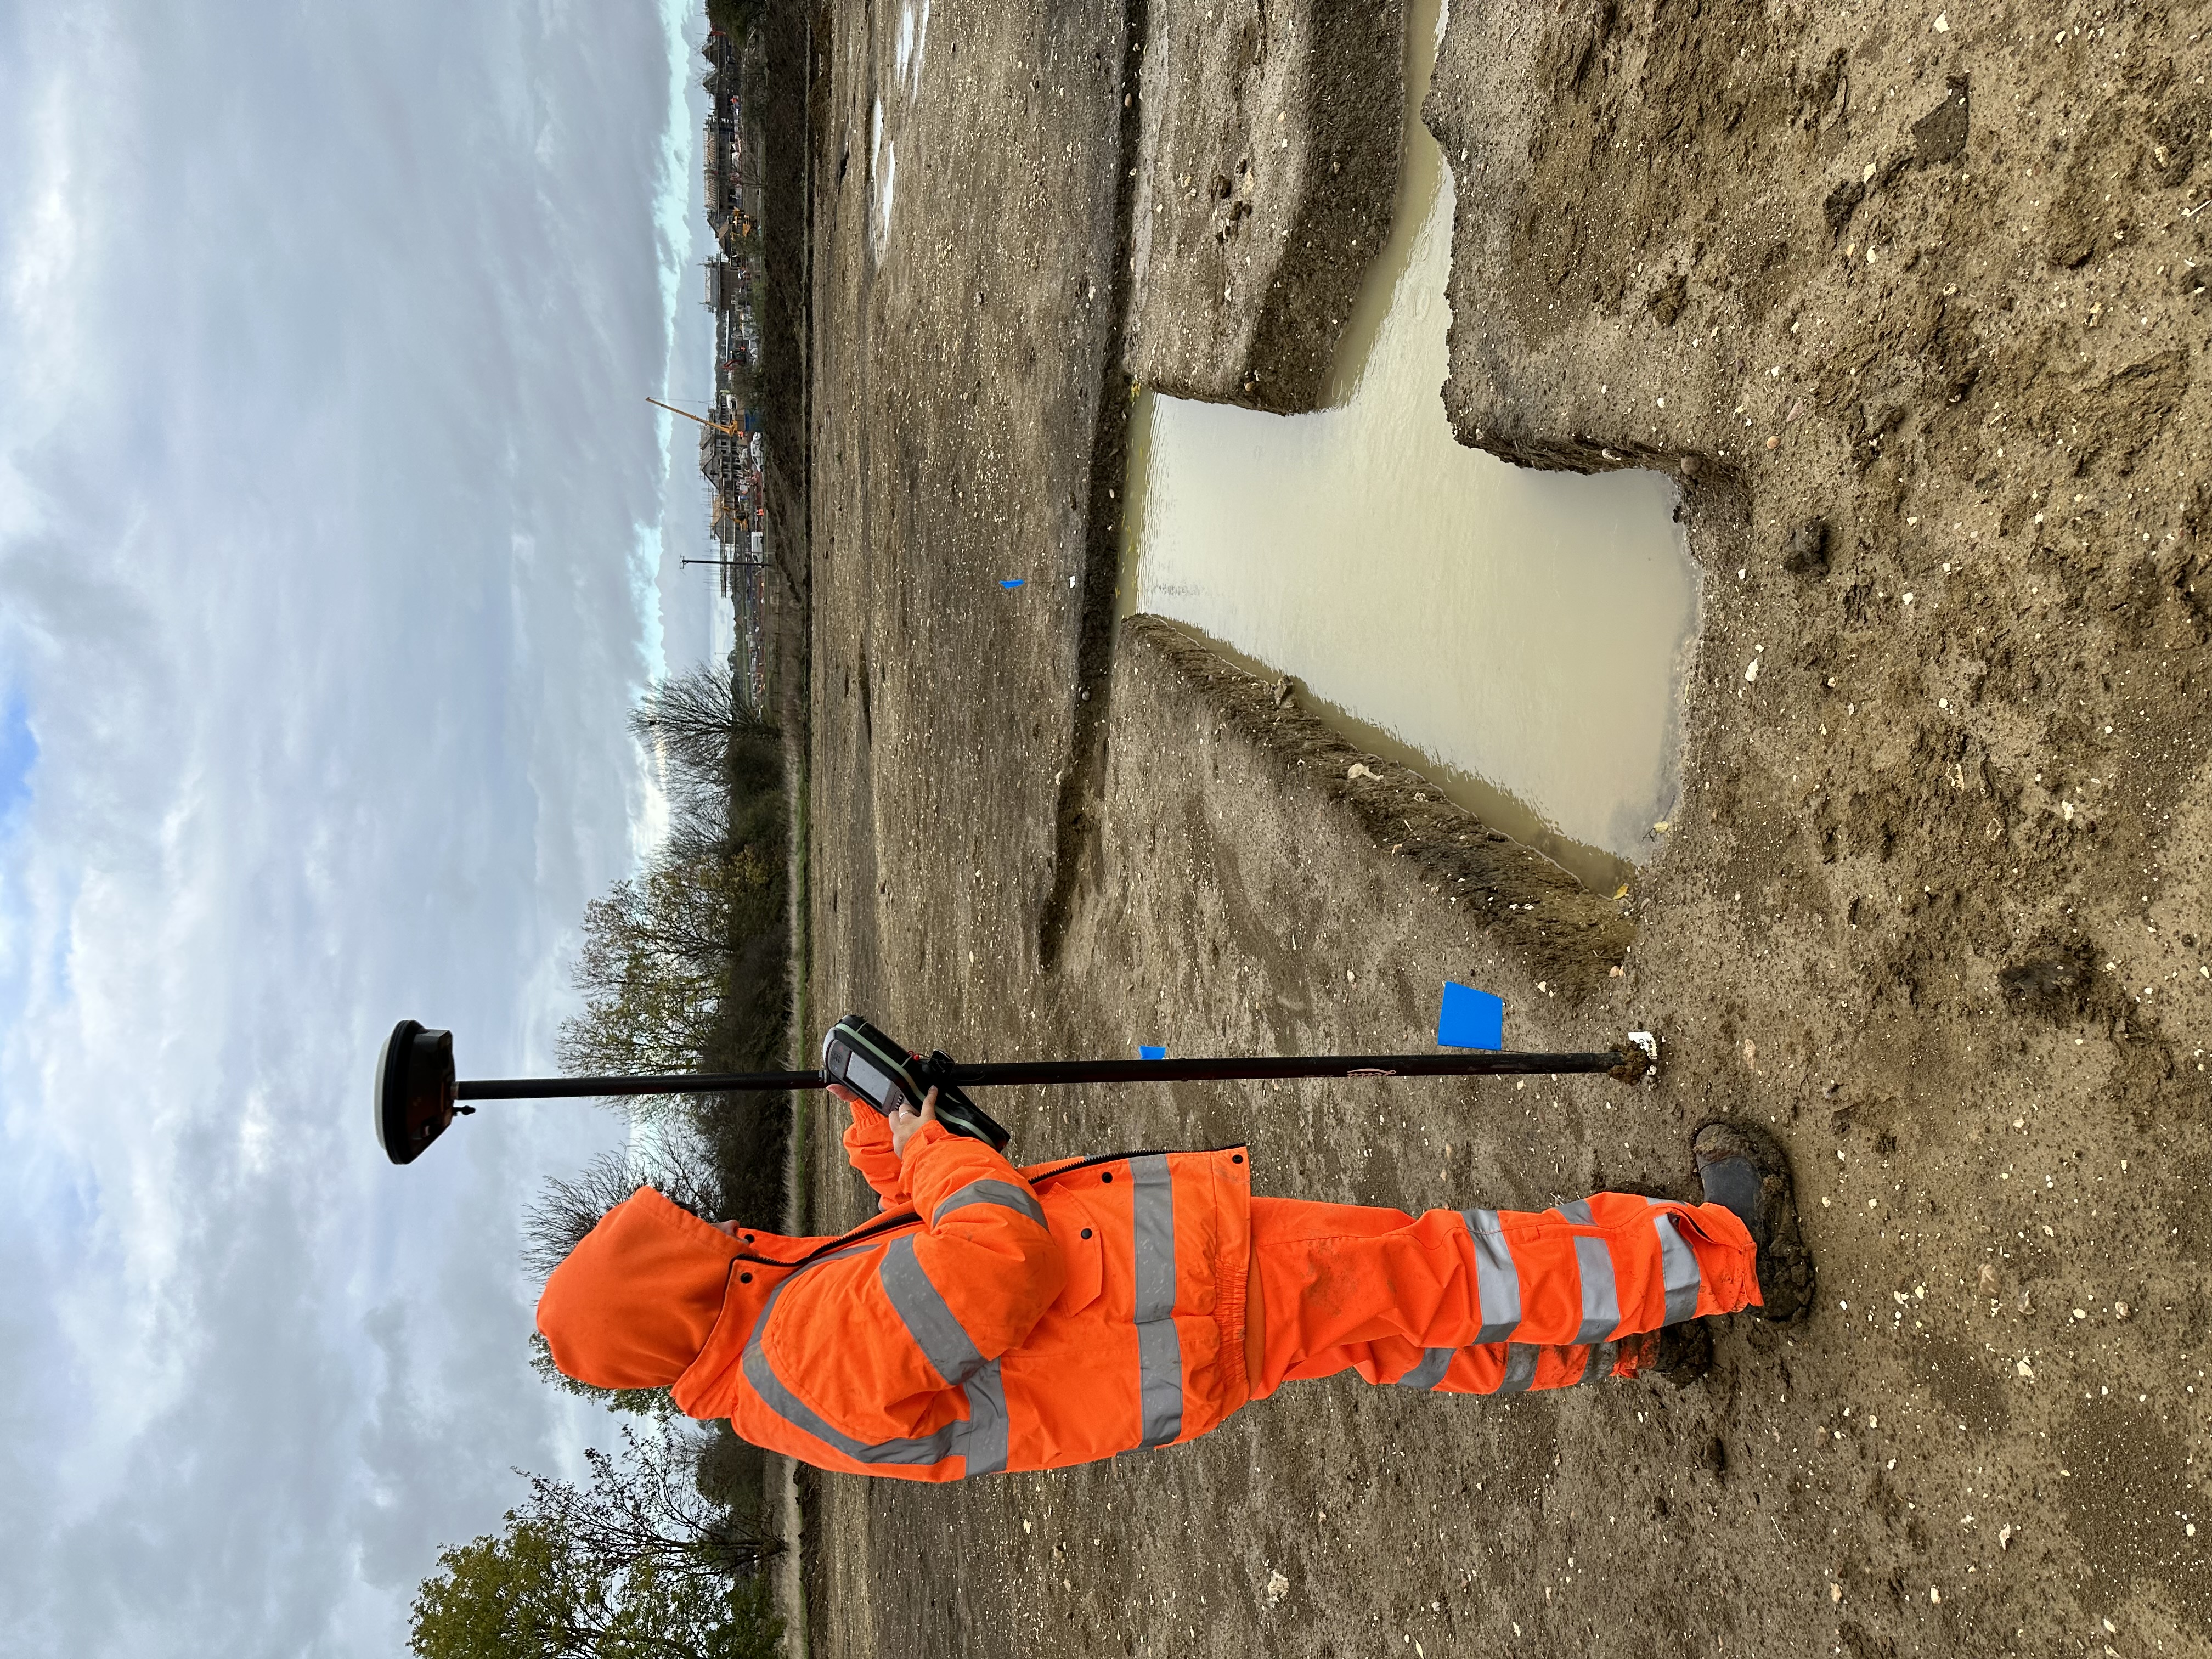 An archaeologist in high visibility clothing uses a tall GPS pole device to mark out the location of an excavated section that is filled with water